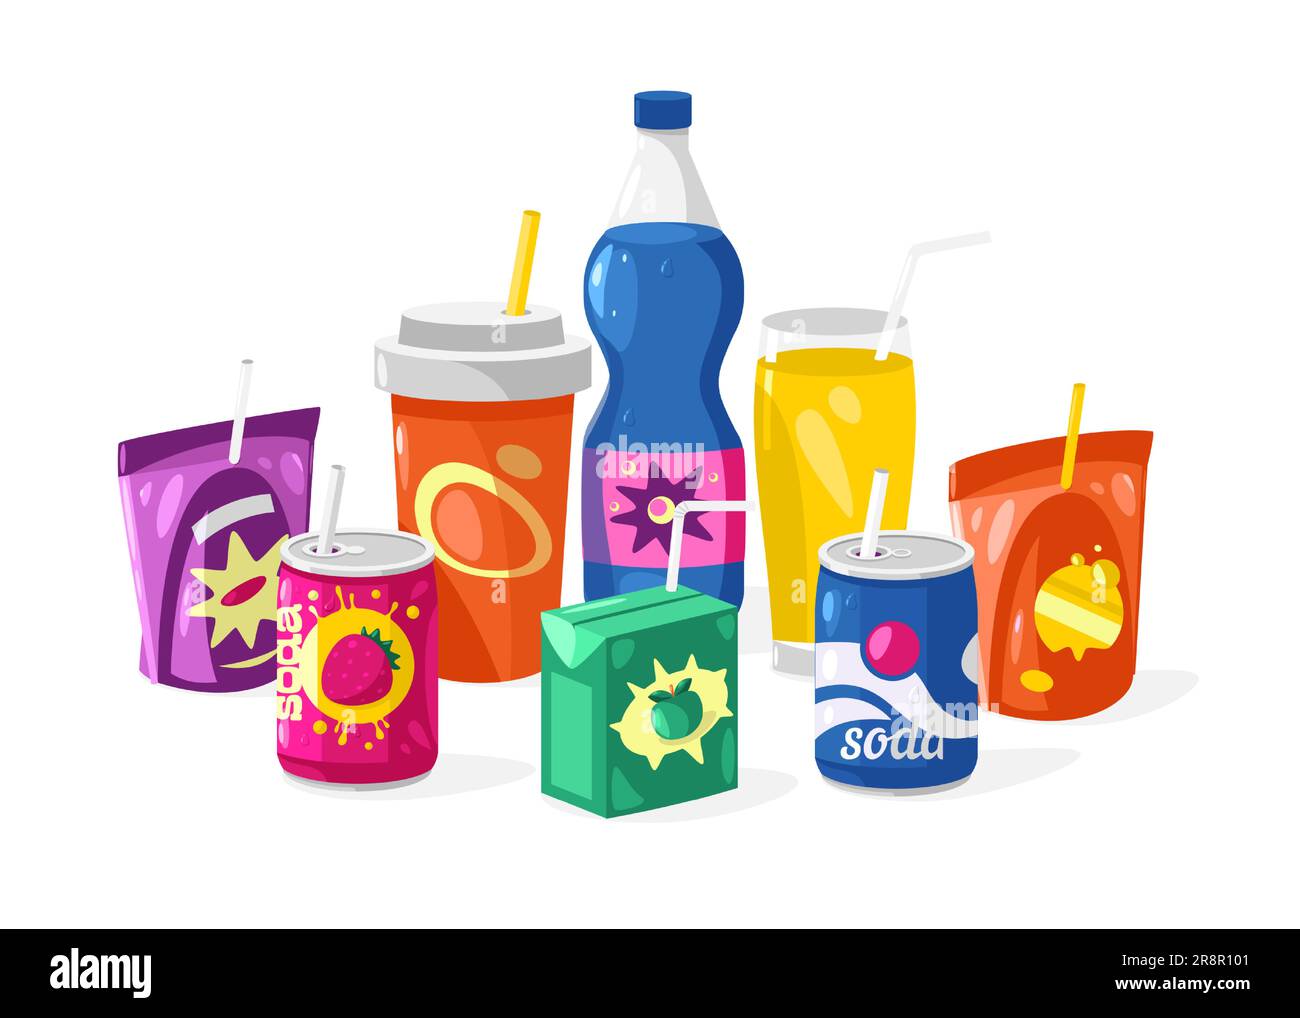 https://c8.alamy.com/comp/2R8R101/sweet-drinks-with-straws-cute-cartoon-colorful-plastic-straws-for-cold-tea-smoothie-and-fizzy-pop-drinks-summer-glass-beverage-elements-vector-iso-2R8R101.jpg